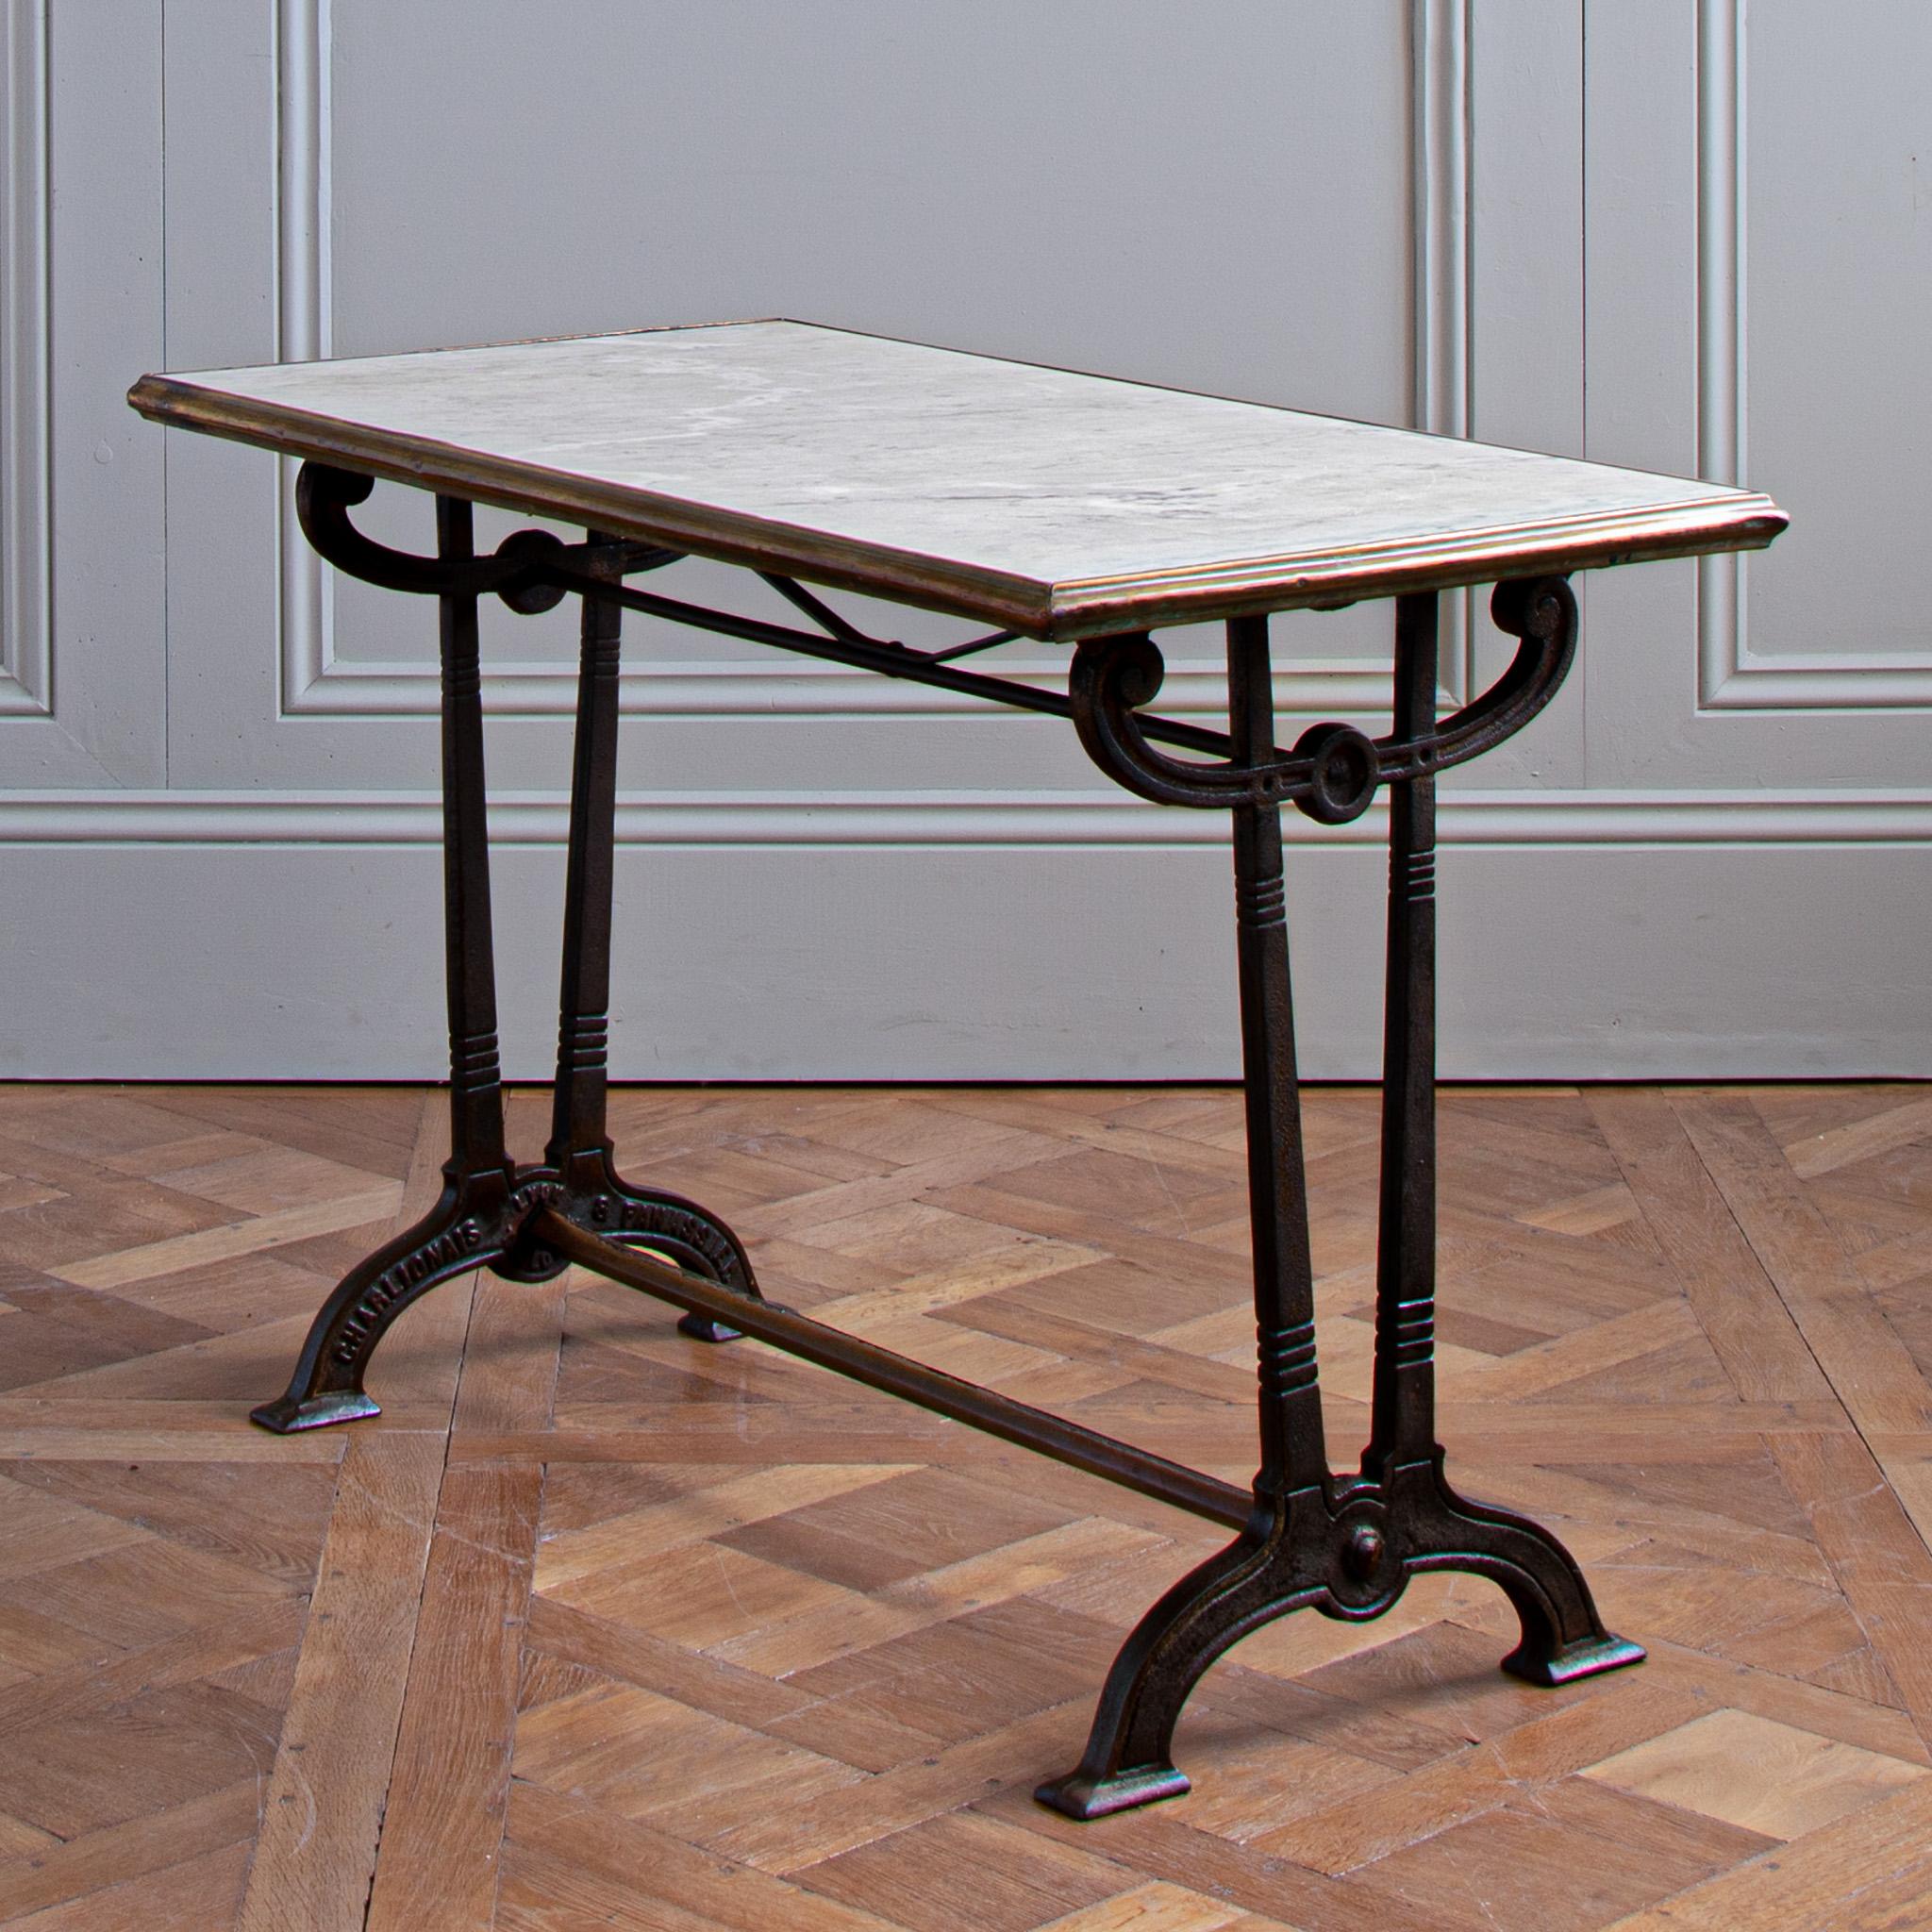 This French, Art Nouveau Bistro Table by Charlionais & Panassier, circa 1900, is a find. The cast iron base has a form that is reminiscent of the Paris metro signs of the same period. Well crafted and beautifully made the piece has weathered the